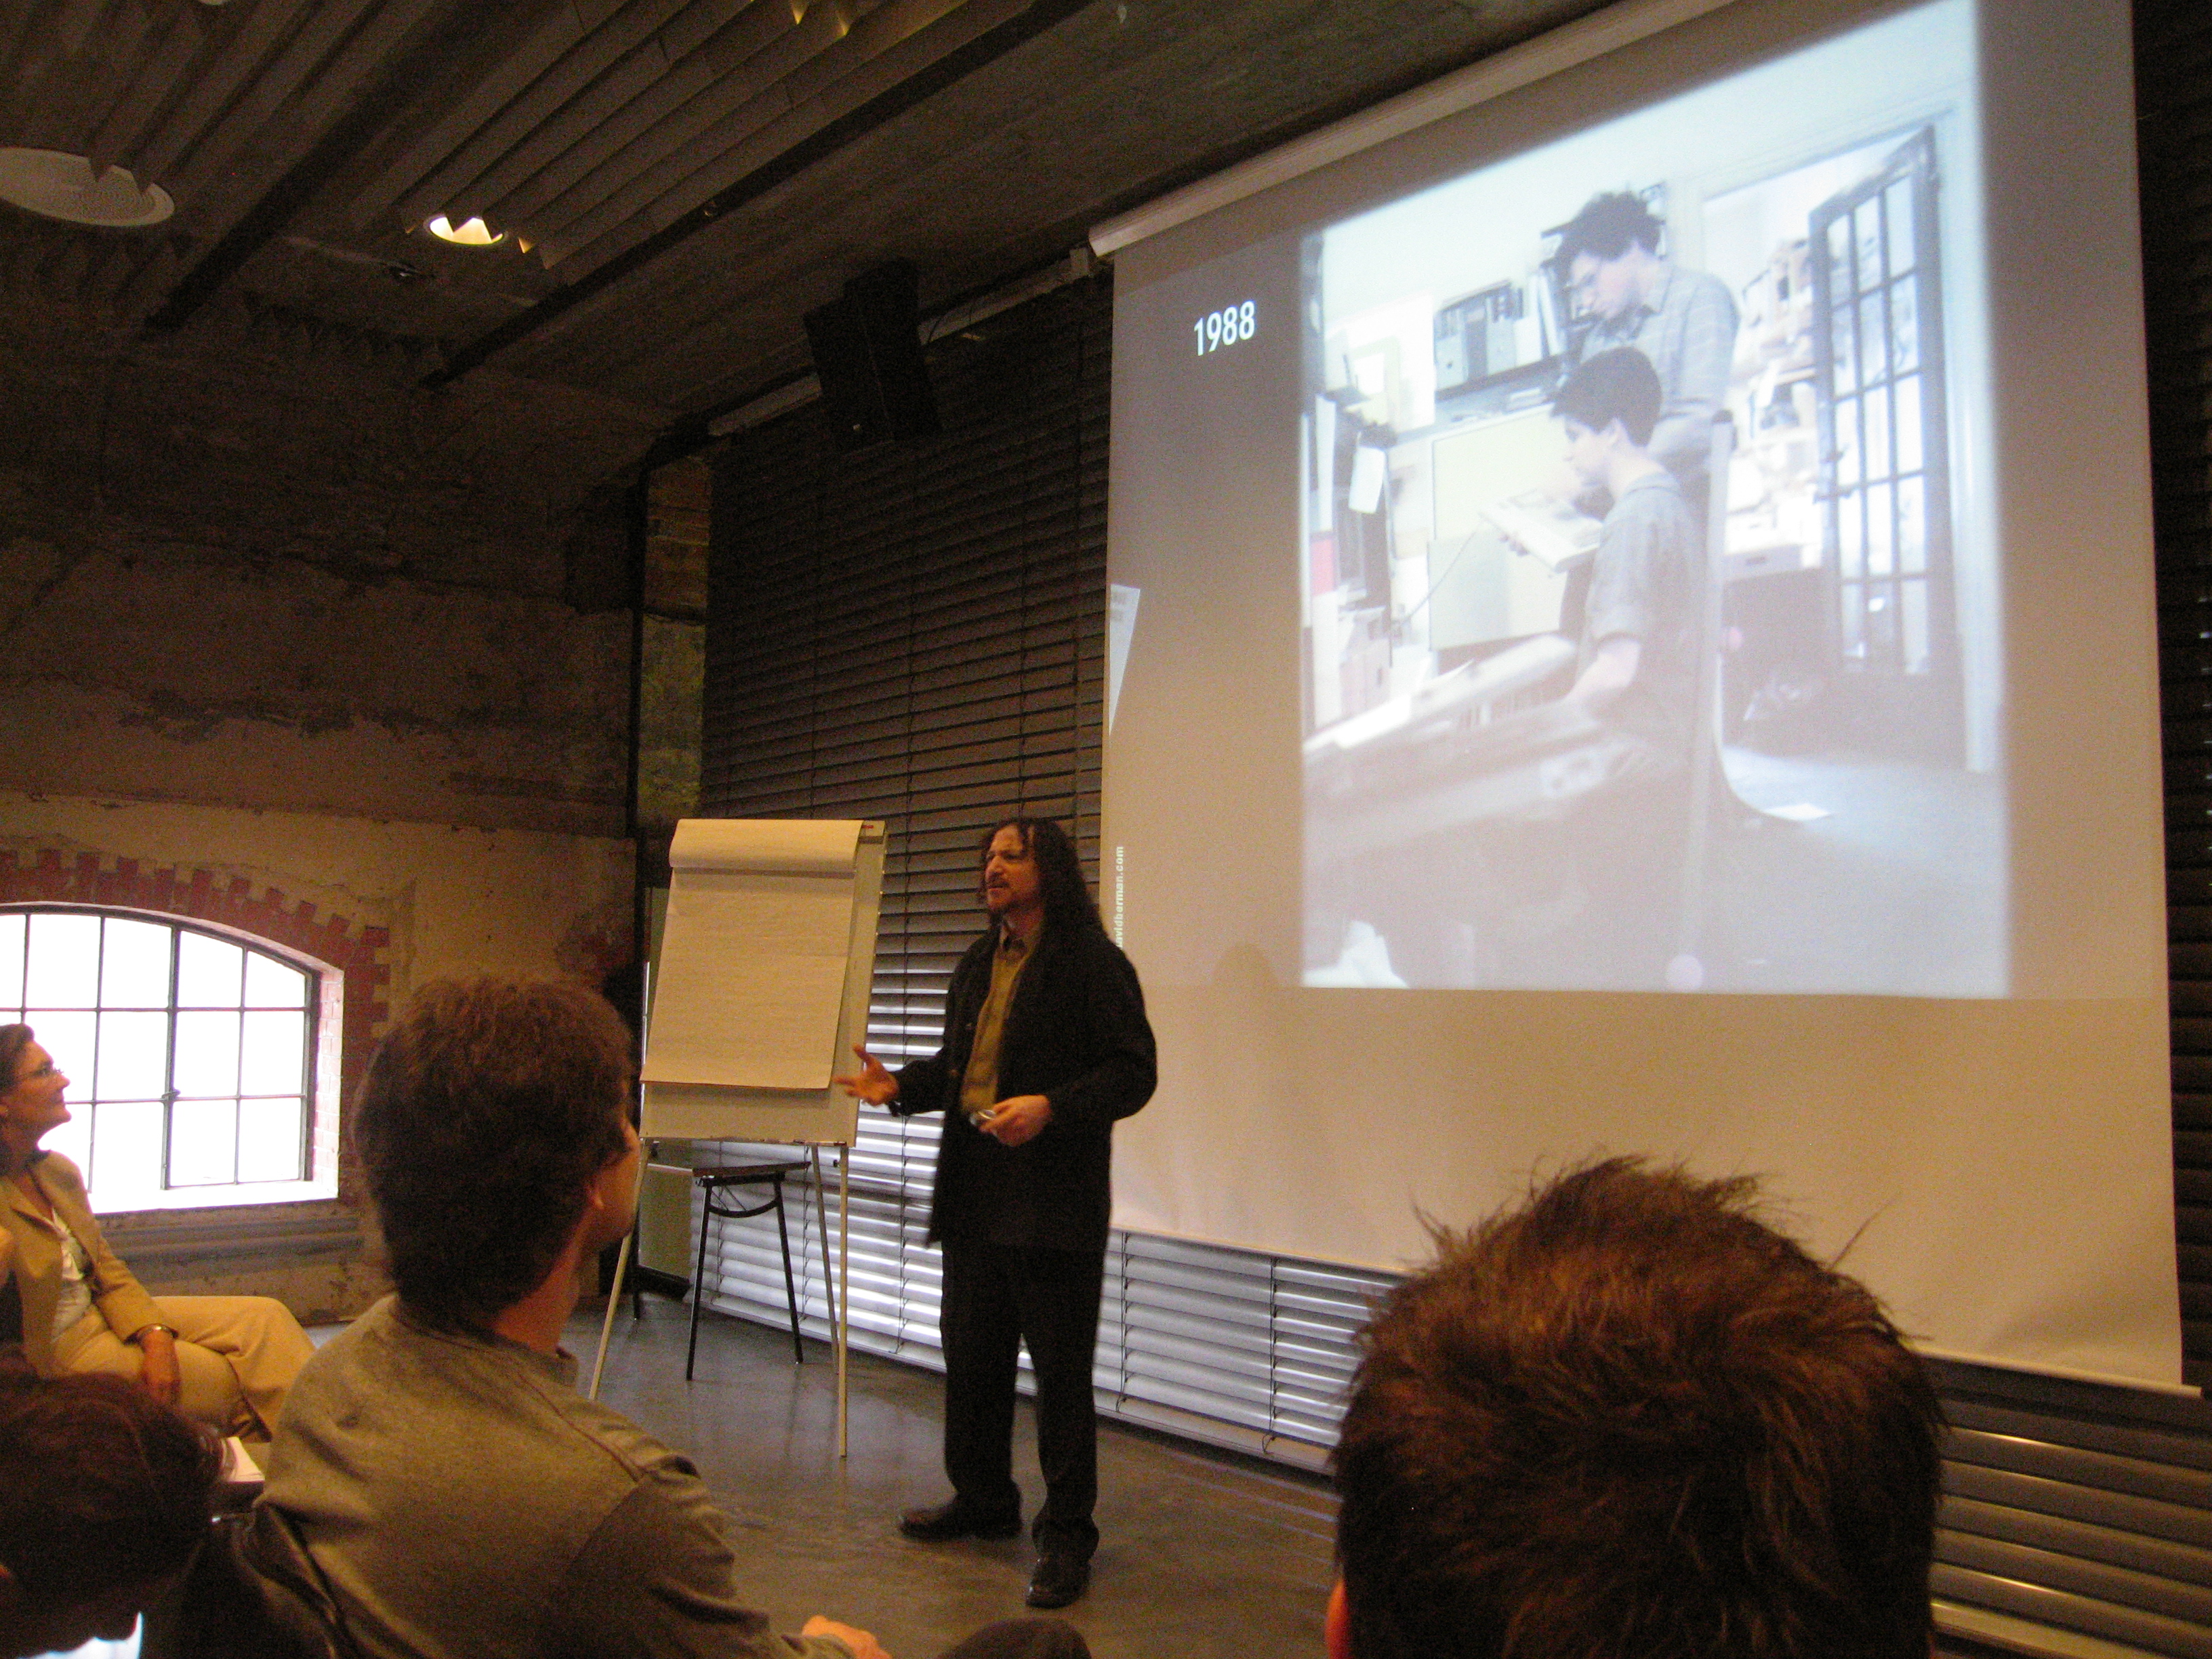 Photo of David Berman standing in front of an audience, presenting slides.